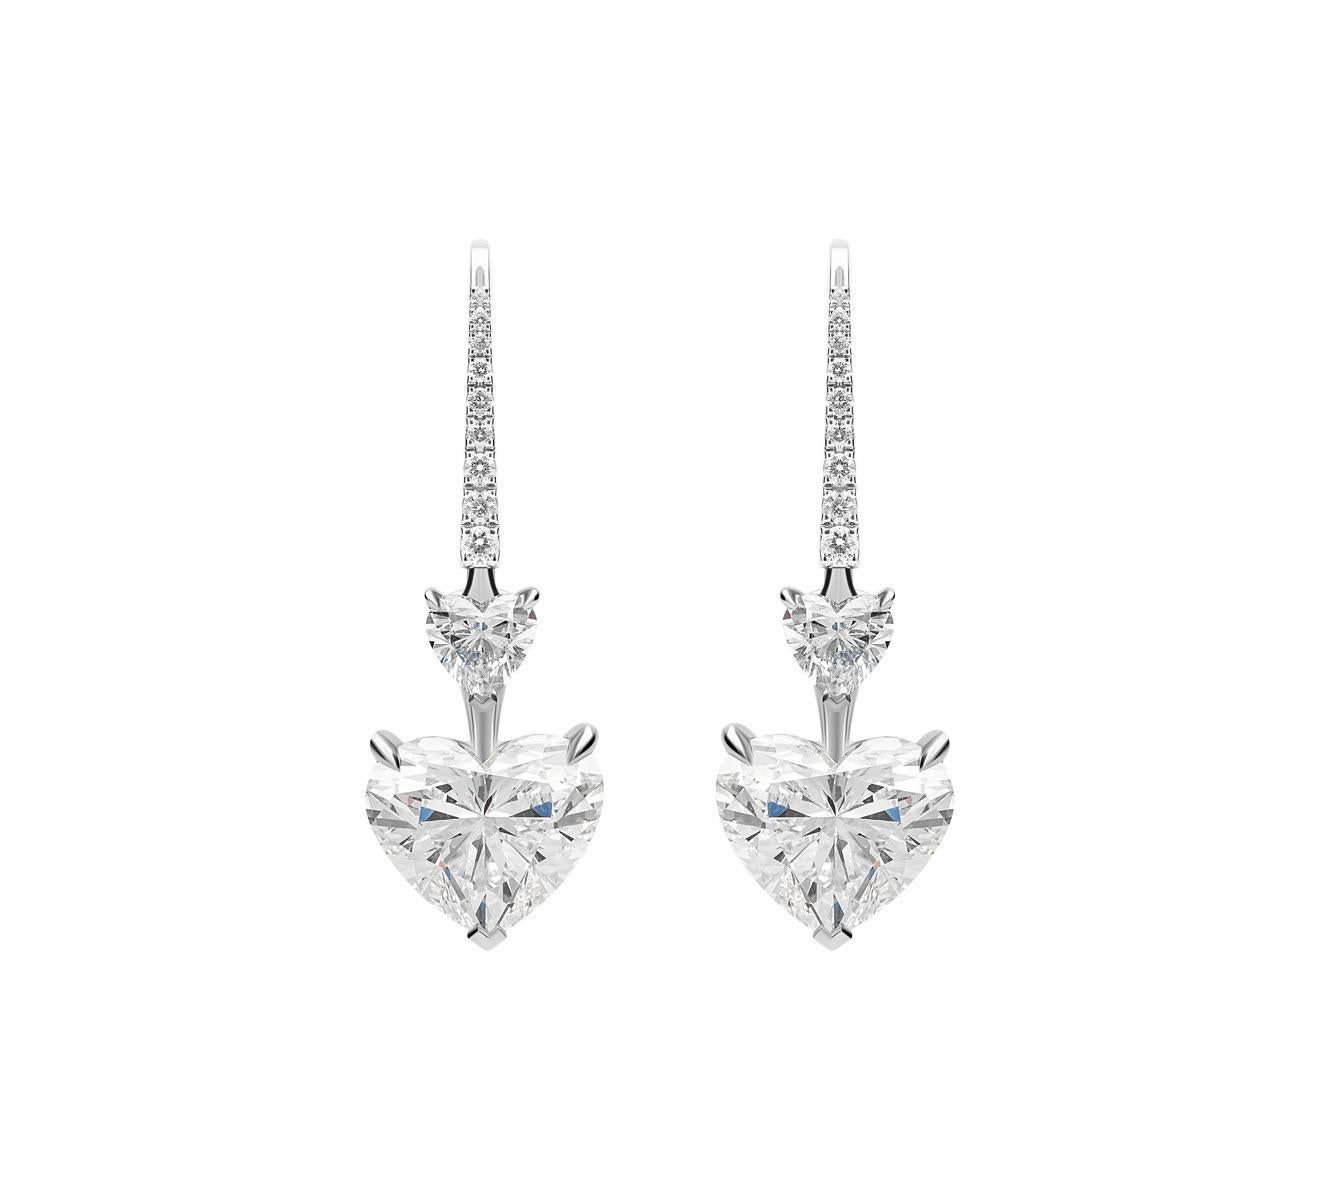 Heart Shape Diamonds each weighing 2.0 carat, suspended from Heart shape Diamonds each weighing 0.50 Carats and embellished with Round Diamonds weighing 0.30 Carats.
Heart shape Diamonds graded as H-I color and SI clarity.
Set in Platinum.